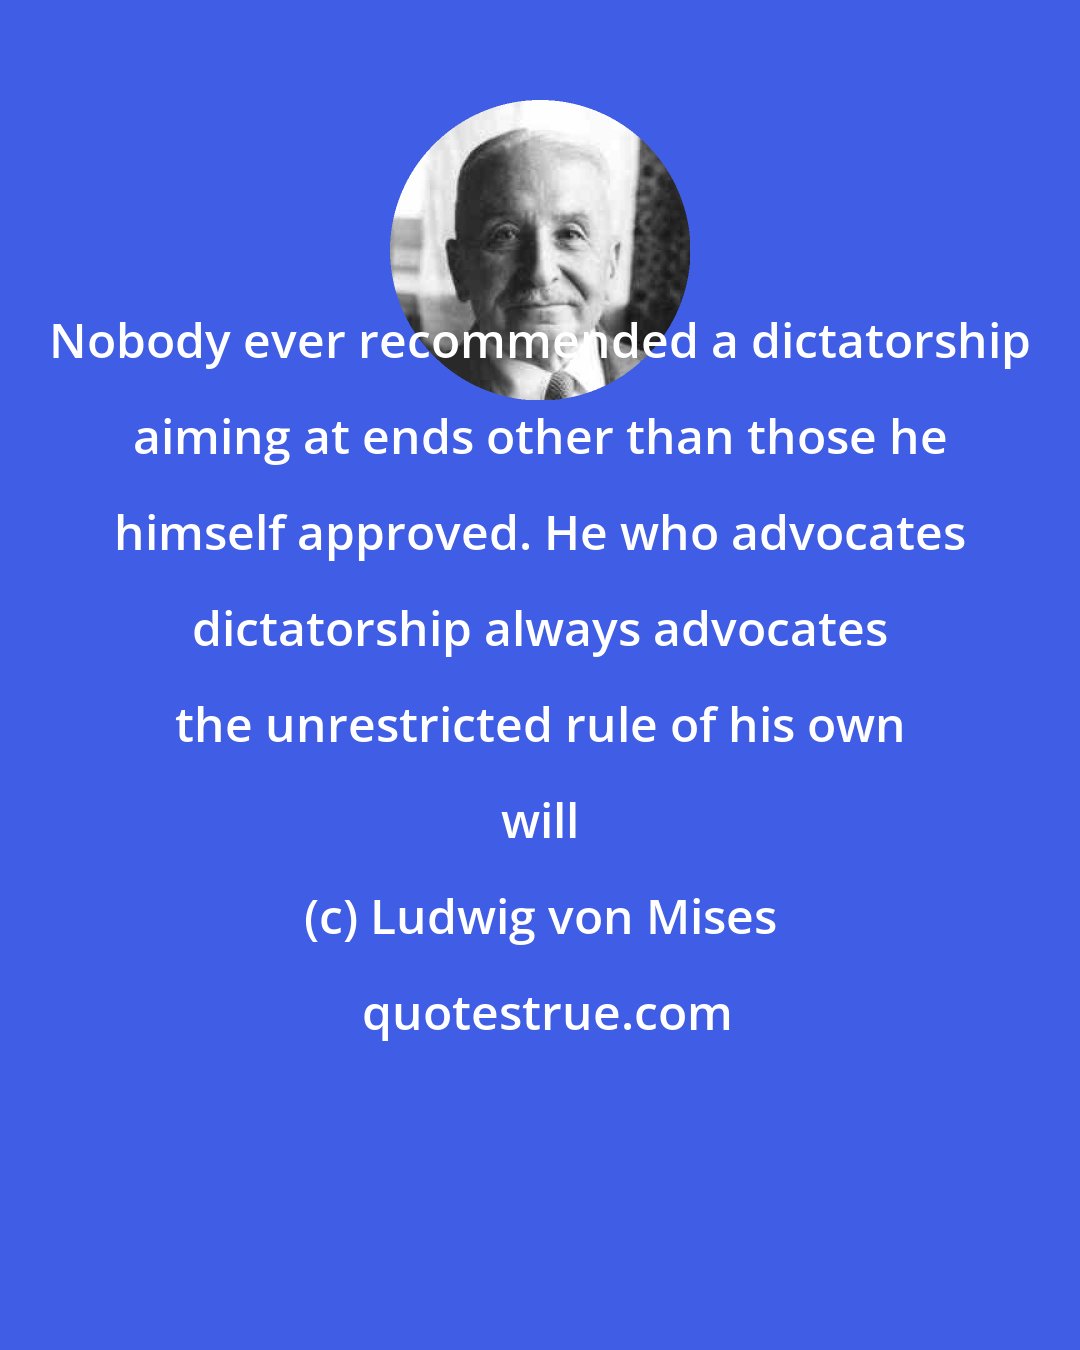 Ludwig von Mises: Nobody ever recommended a dictatorship aiming at ends other than those he himself approved. He who advocates dictatorship always advocates the unrestricted rule of his own will